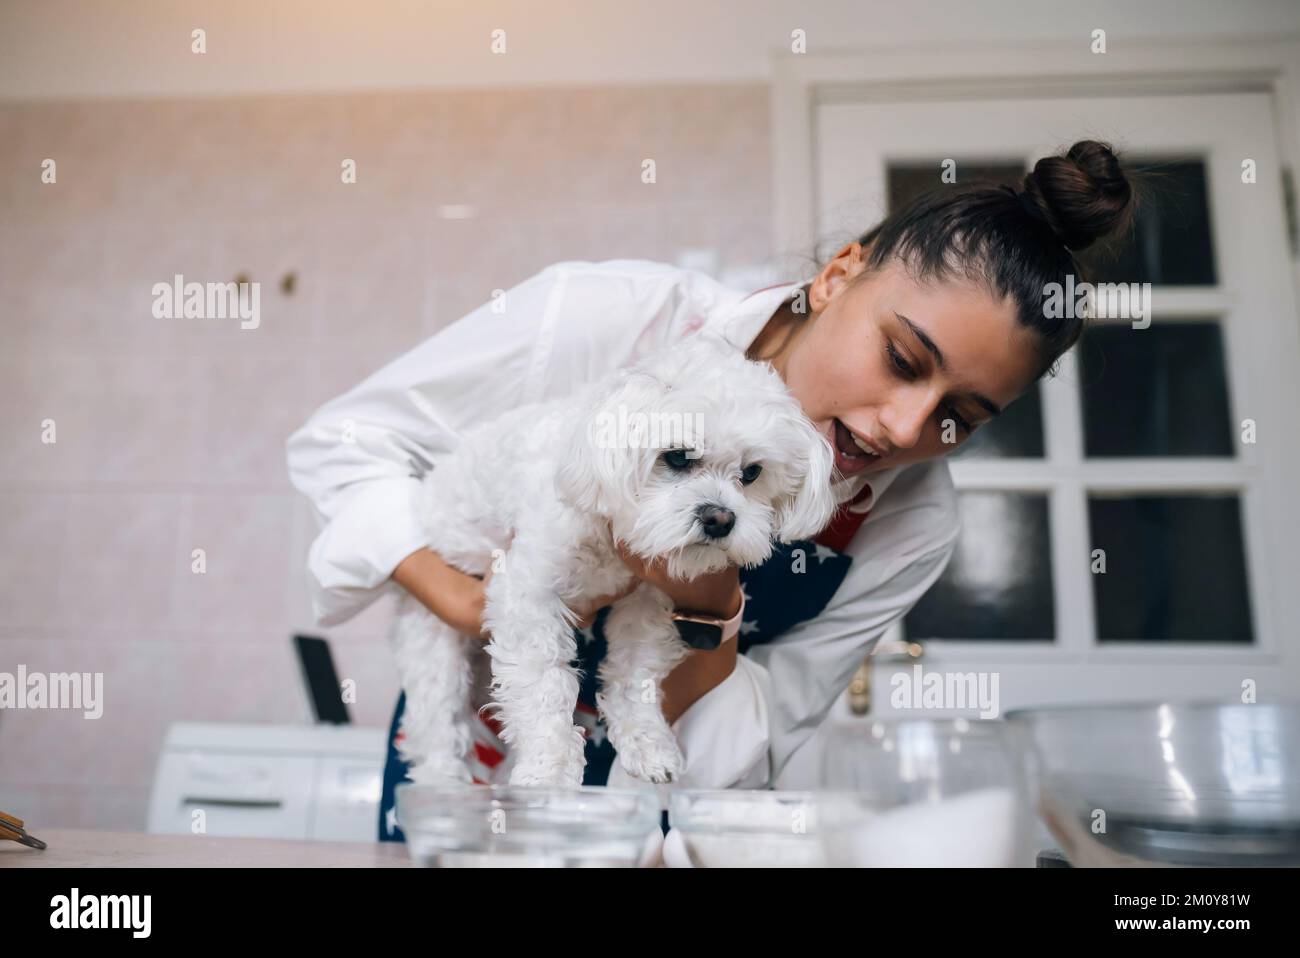 Smiling young woman in the kitchen holding a cute white Maltese dog Stock Photo